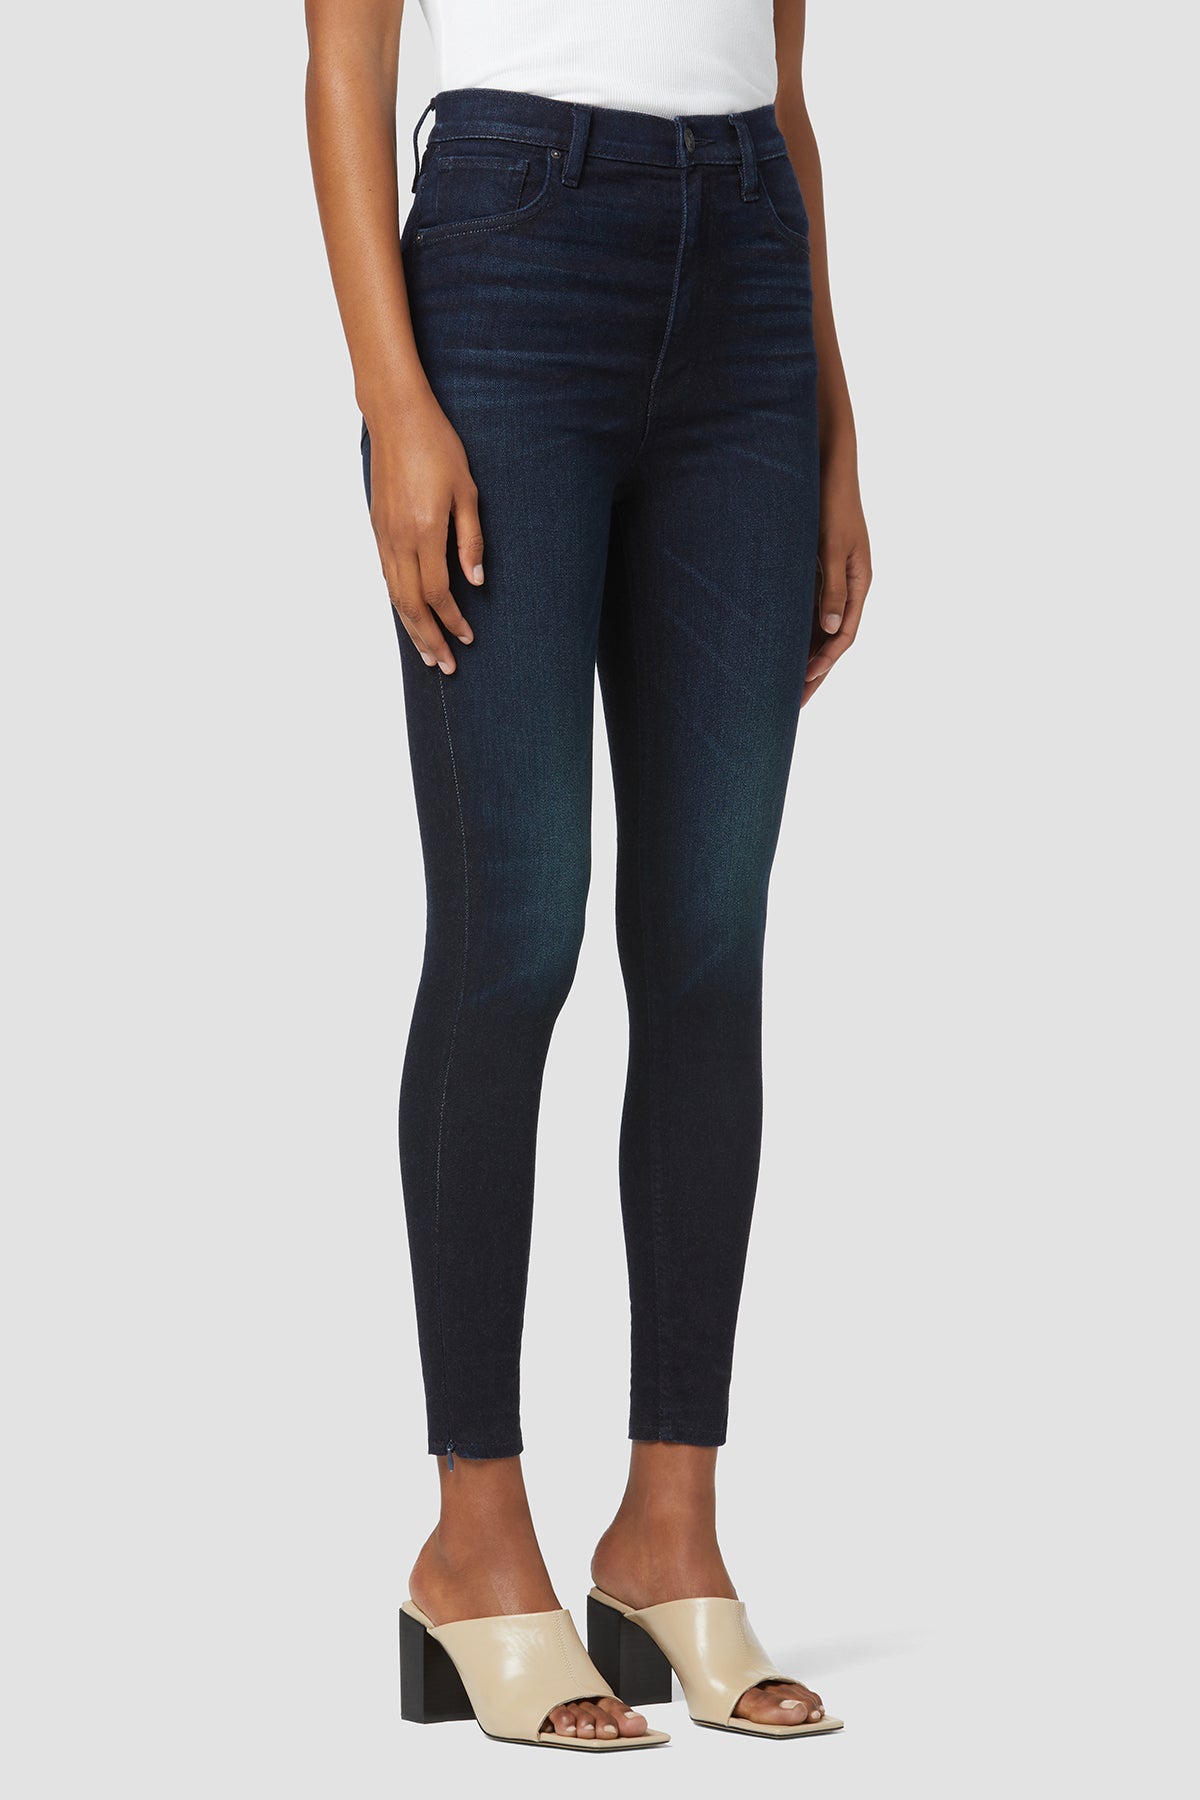 Centerfold Extreme High-Rise Super Skinny Jean